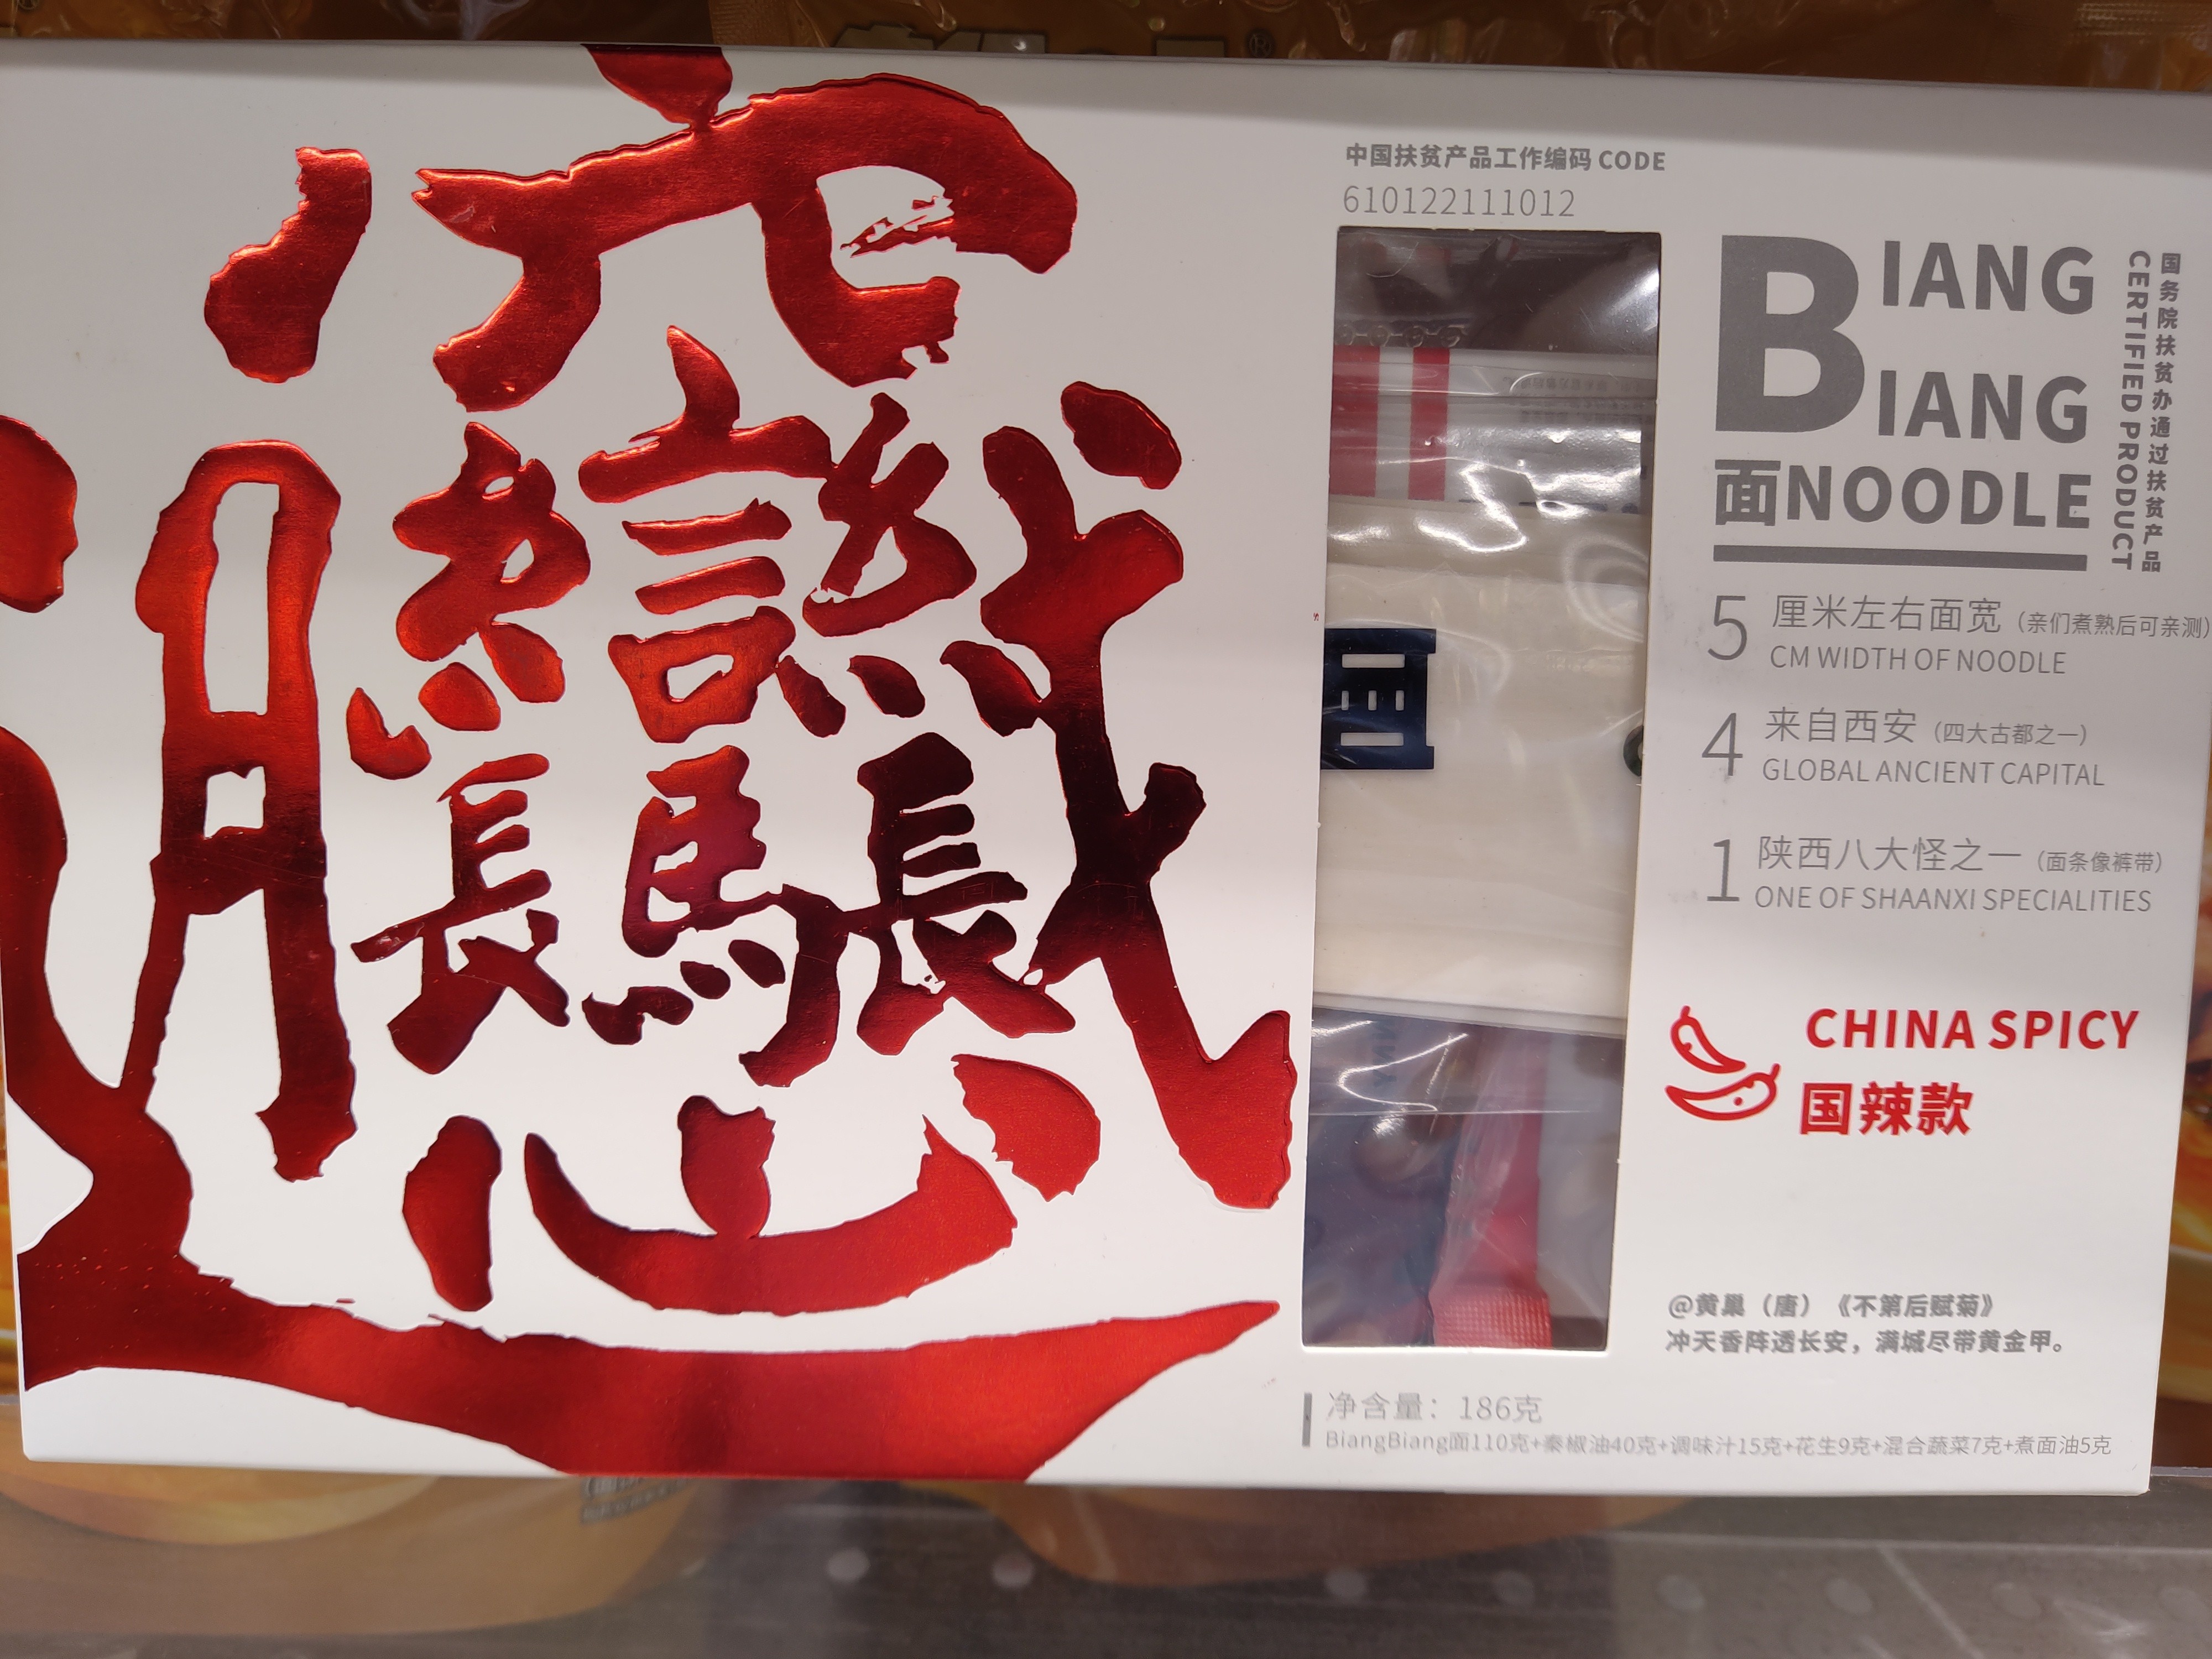 biang-biang-noodle-pepper-oilchina-spicy